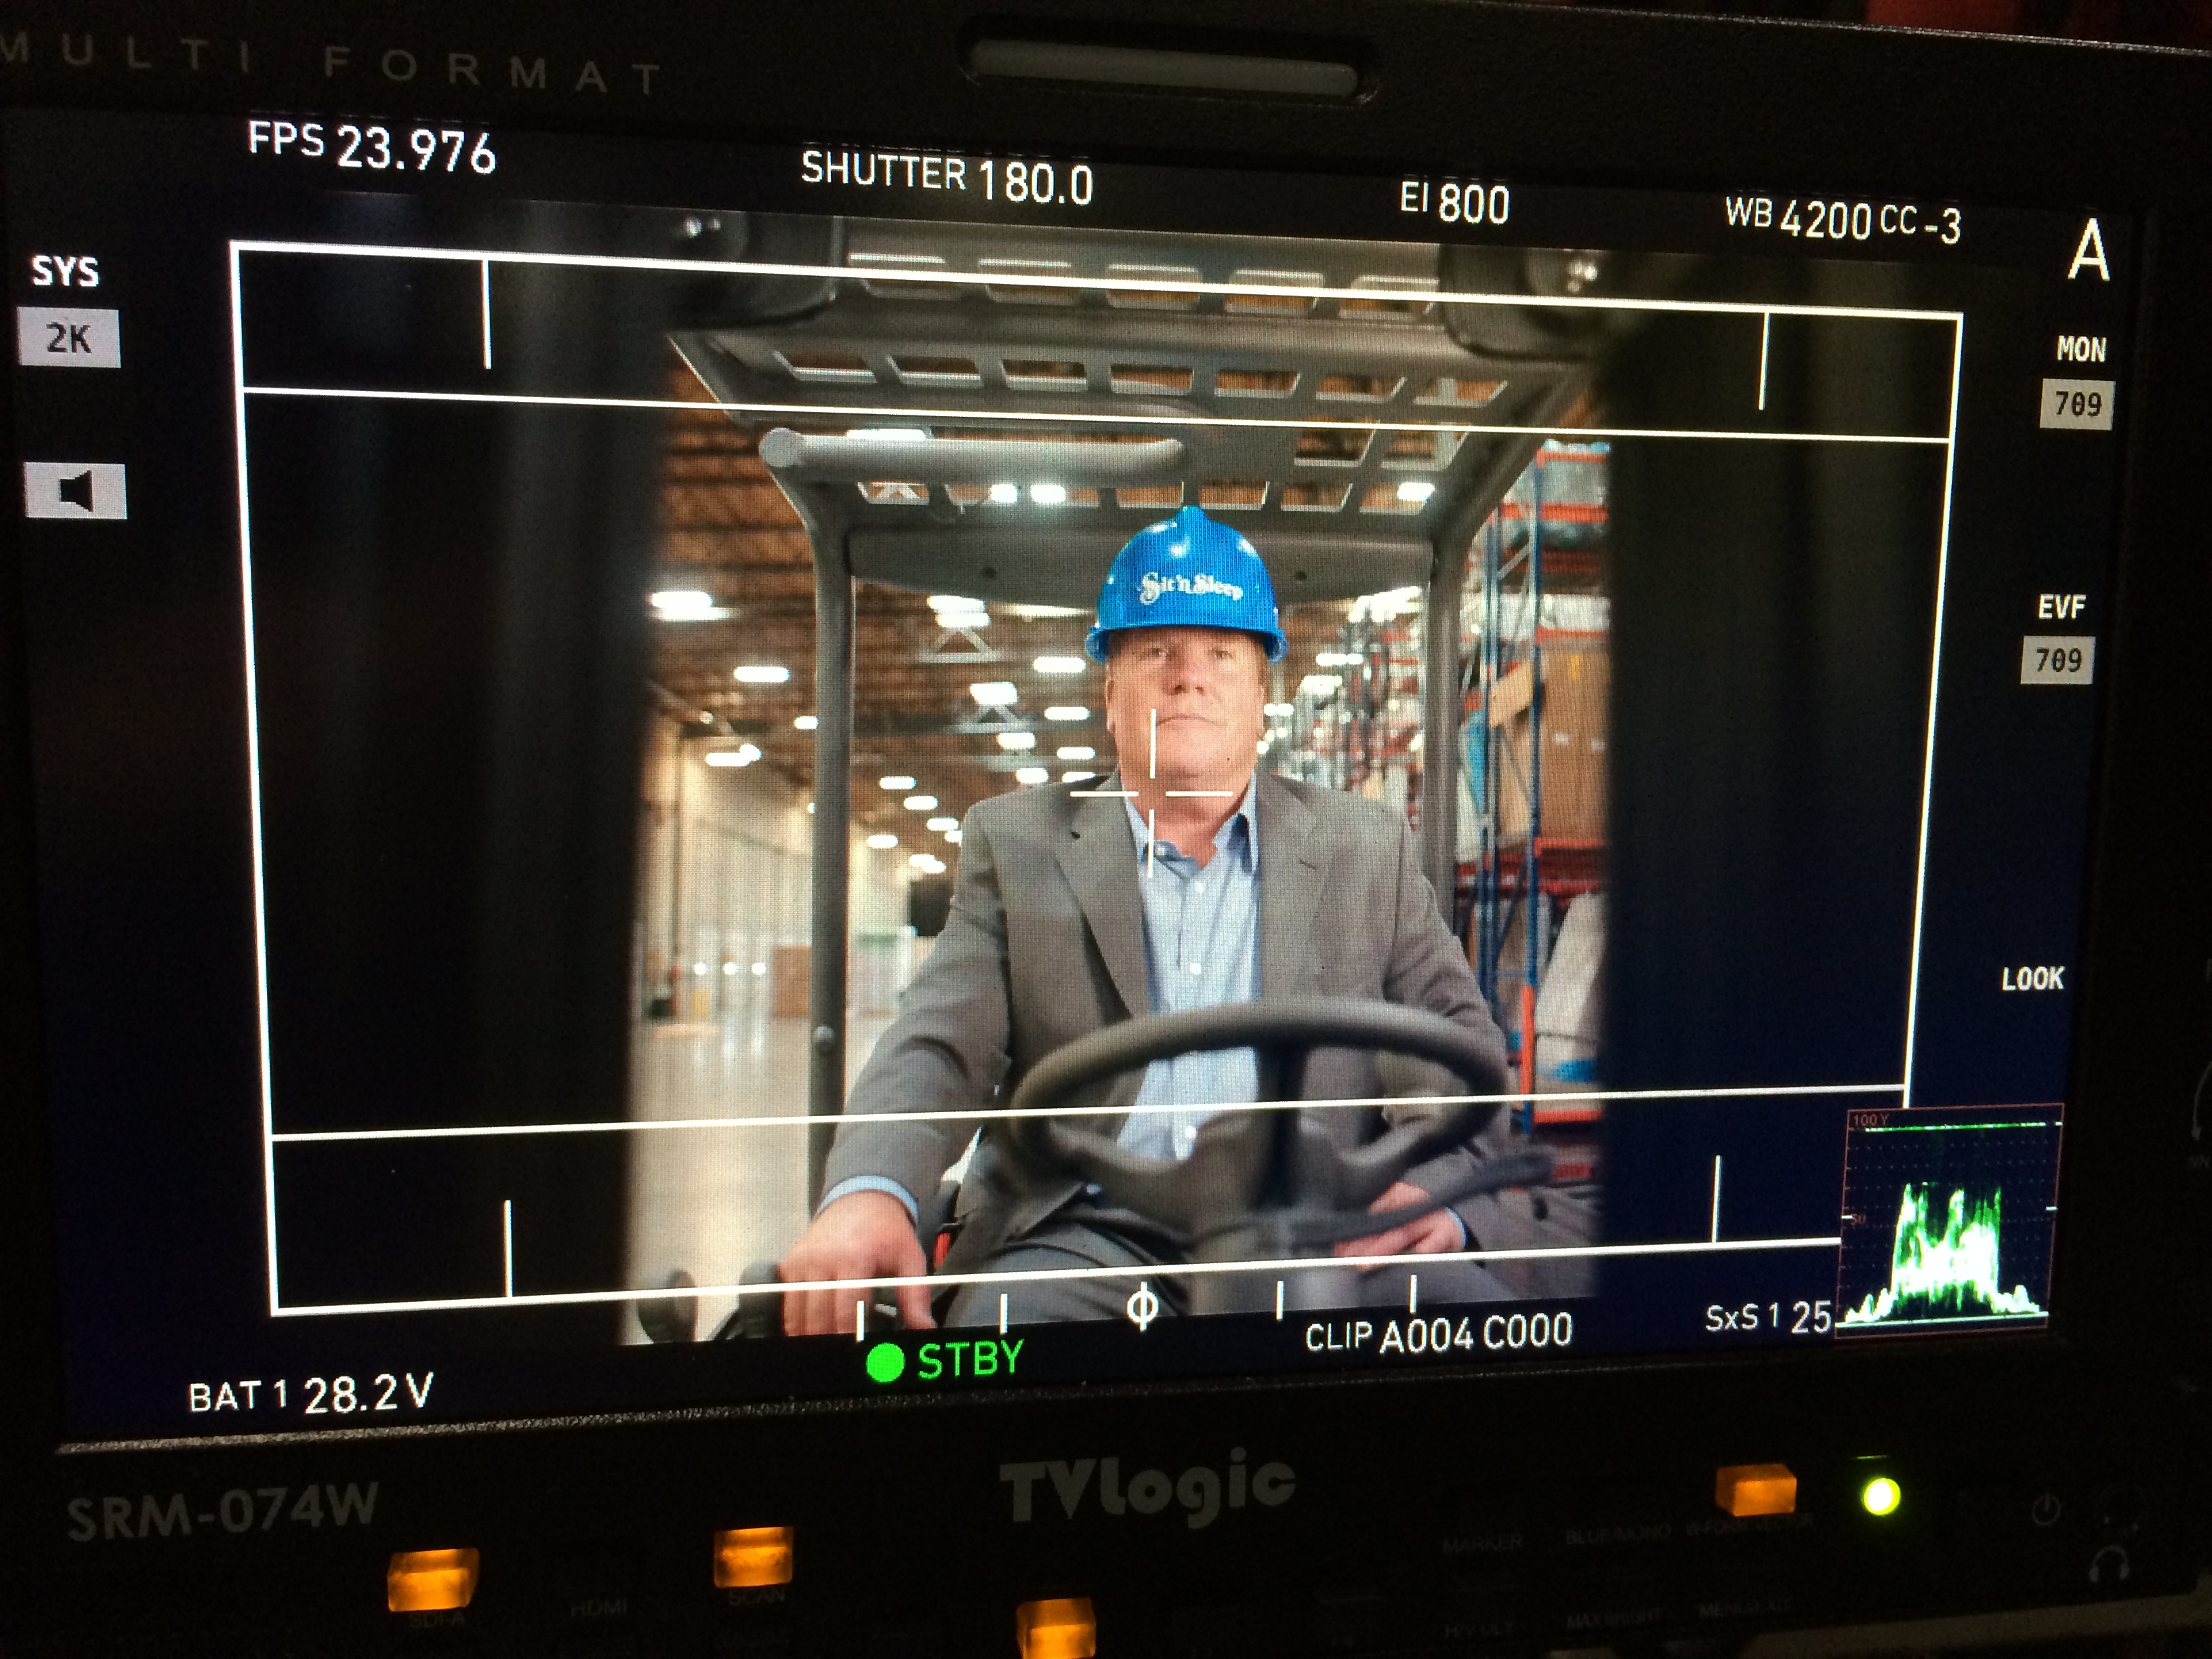 Driving the Forklift on the set of 